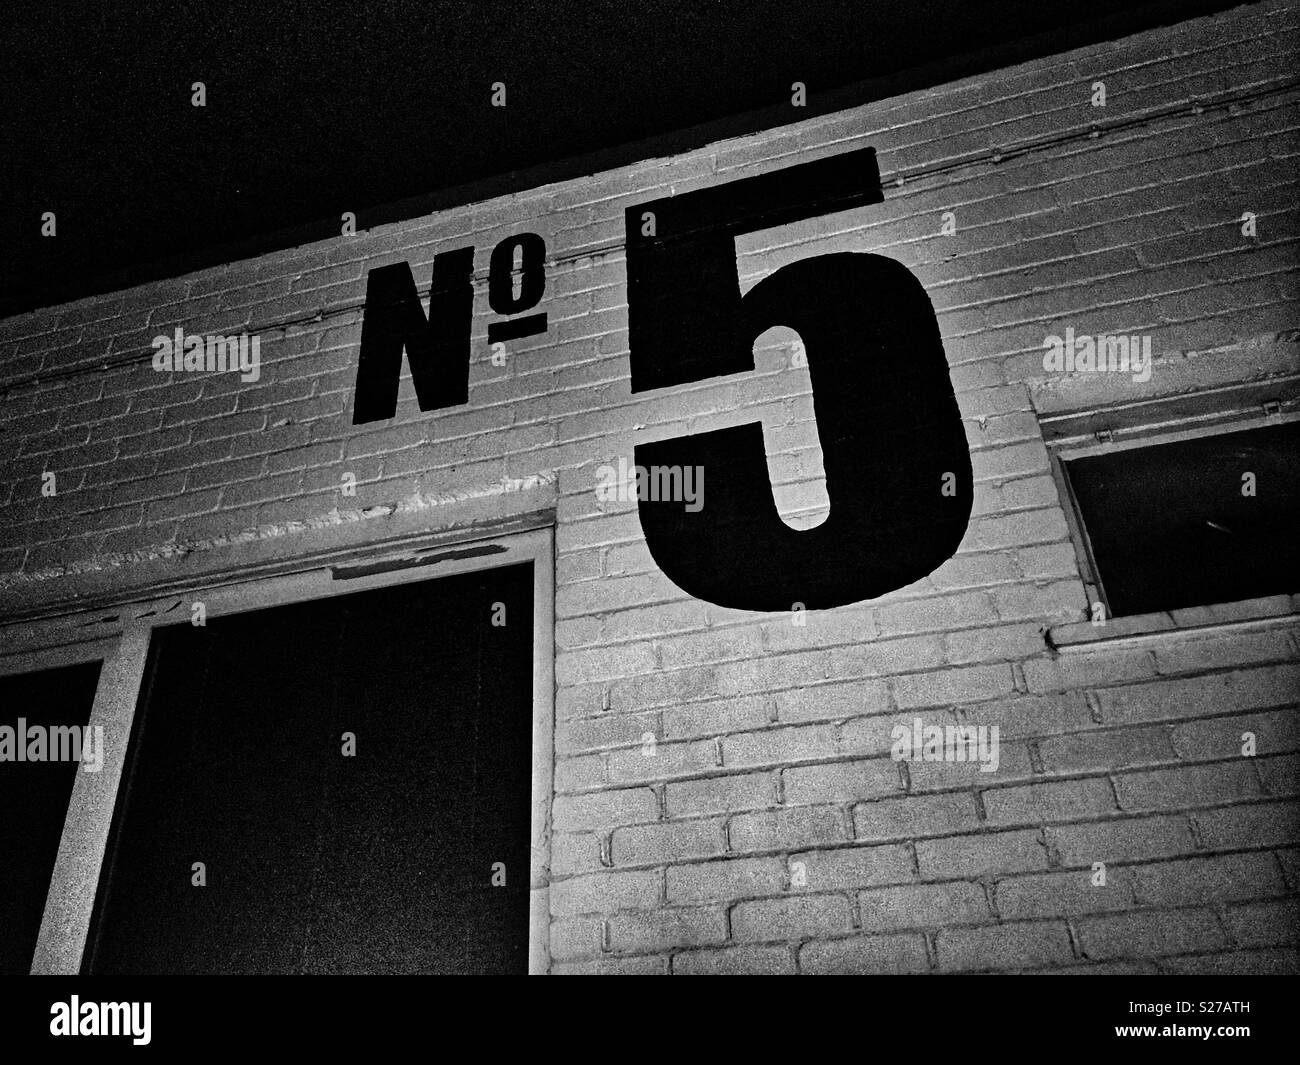 Chanel no 5 Black and White Stock Photos & Images - Alamy